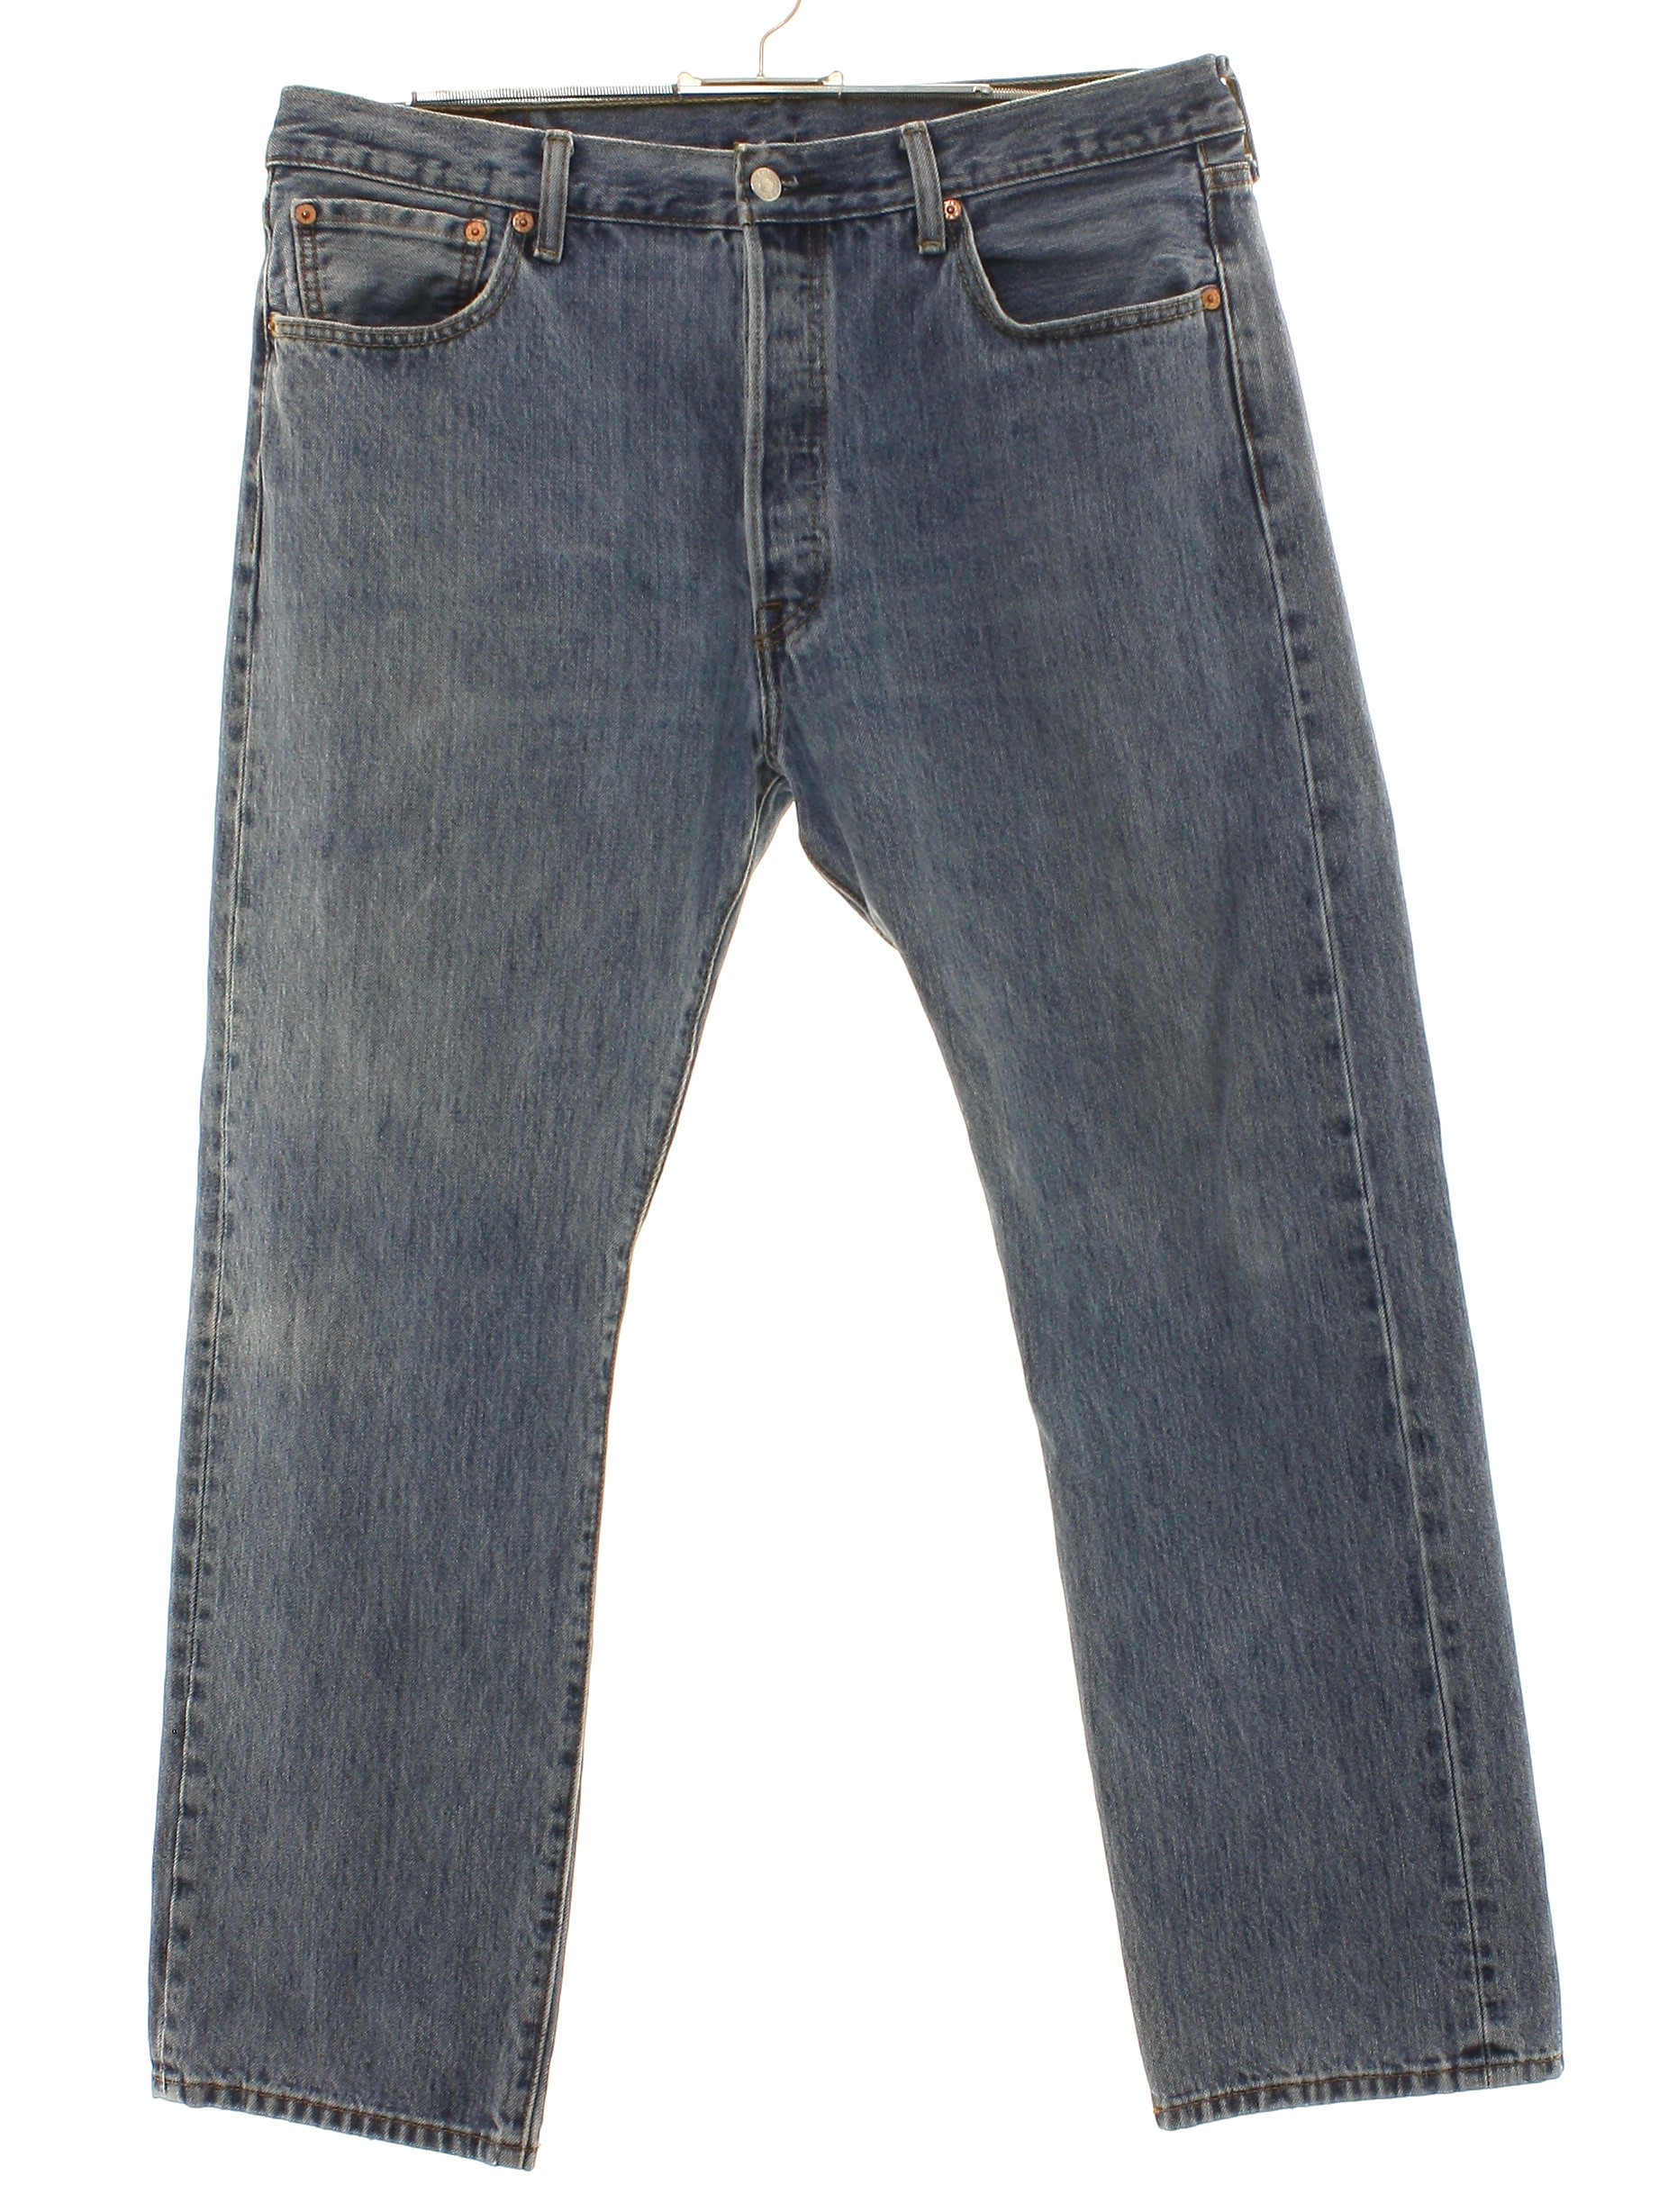 Pants: 90s -Levis 501- Mens slightly faded and worn blue cotton denim ...